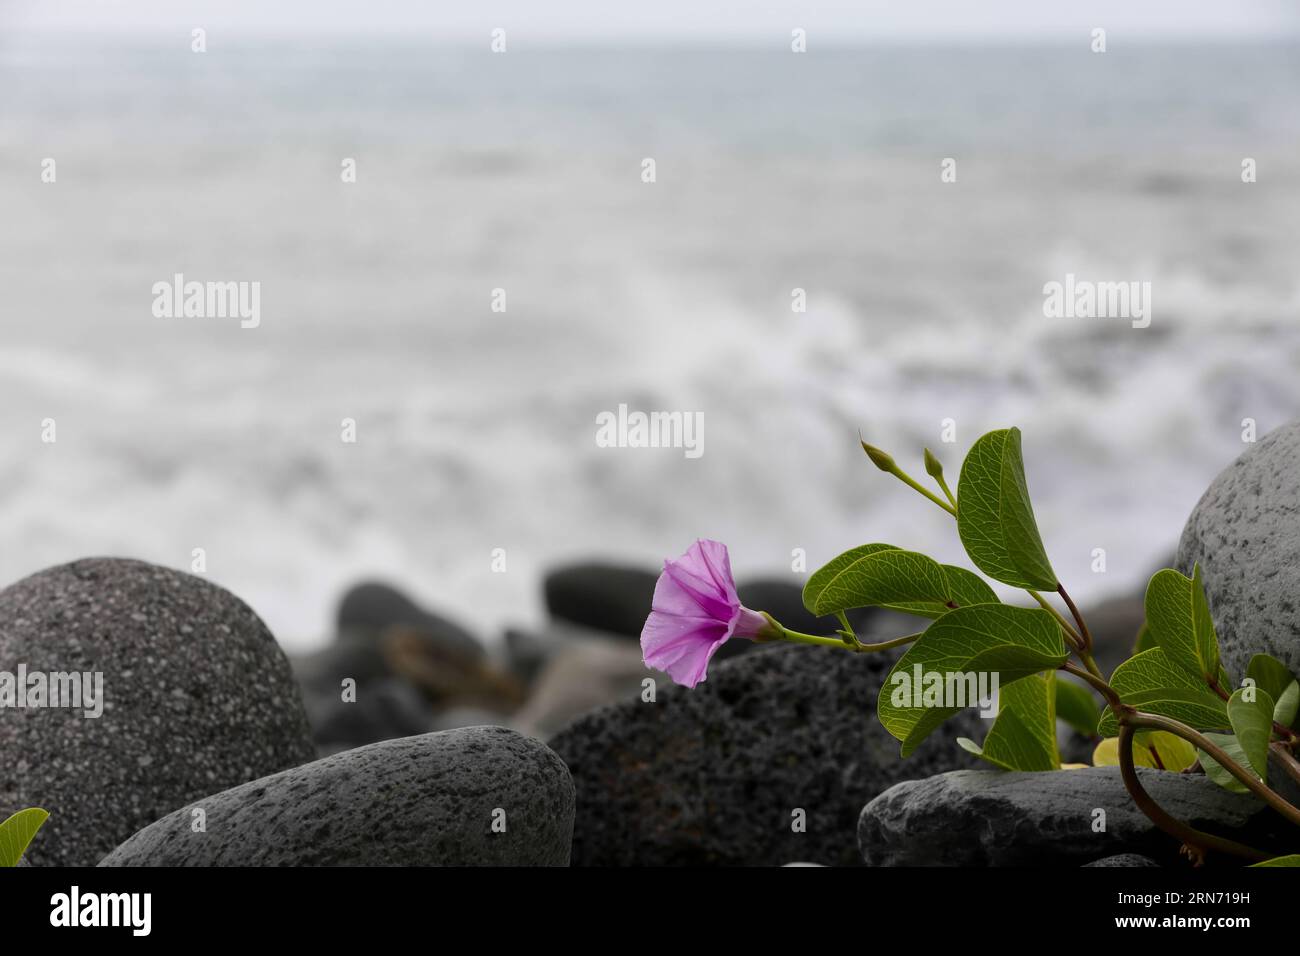 LA REUNION, Aug. 12, 2015 -- A flower is seen on the Saint Andre beach, France s oversea island La Reunion, on Aug. 12, 2015. La Reunion authority Monday said that no clues related to the missing flight MH370 has been found here since the launch of a tridimensional search last Friday. ) LA REUNION-MH370 DEBRIS-SEARCH-CONTINUE PanxSiwei PUBLICATIONxNOTxINxCHN   La Reunion Aug 12 2015 a Flower IS Lakes ON The Saint André Beach France S Oversea Iceland La Reunion ON Aug 12 2015 La Reunion Authority Monday Said Thatcher No clues RELATED to The Missing Flight MH370 has been Found Here Since The Lau Stock Photo